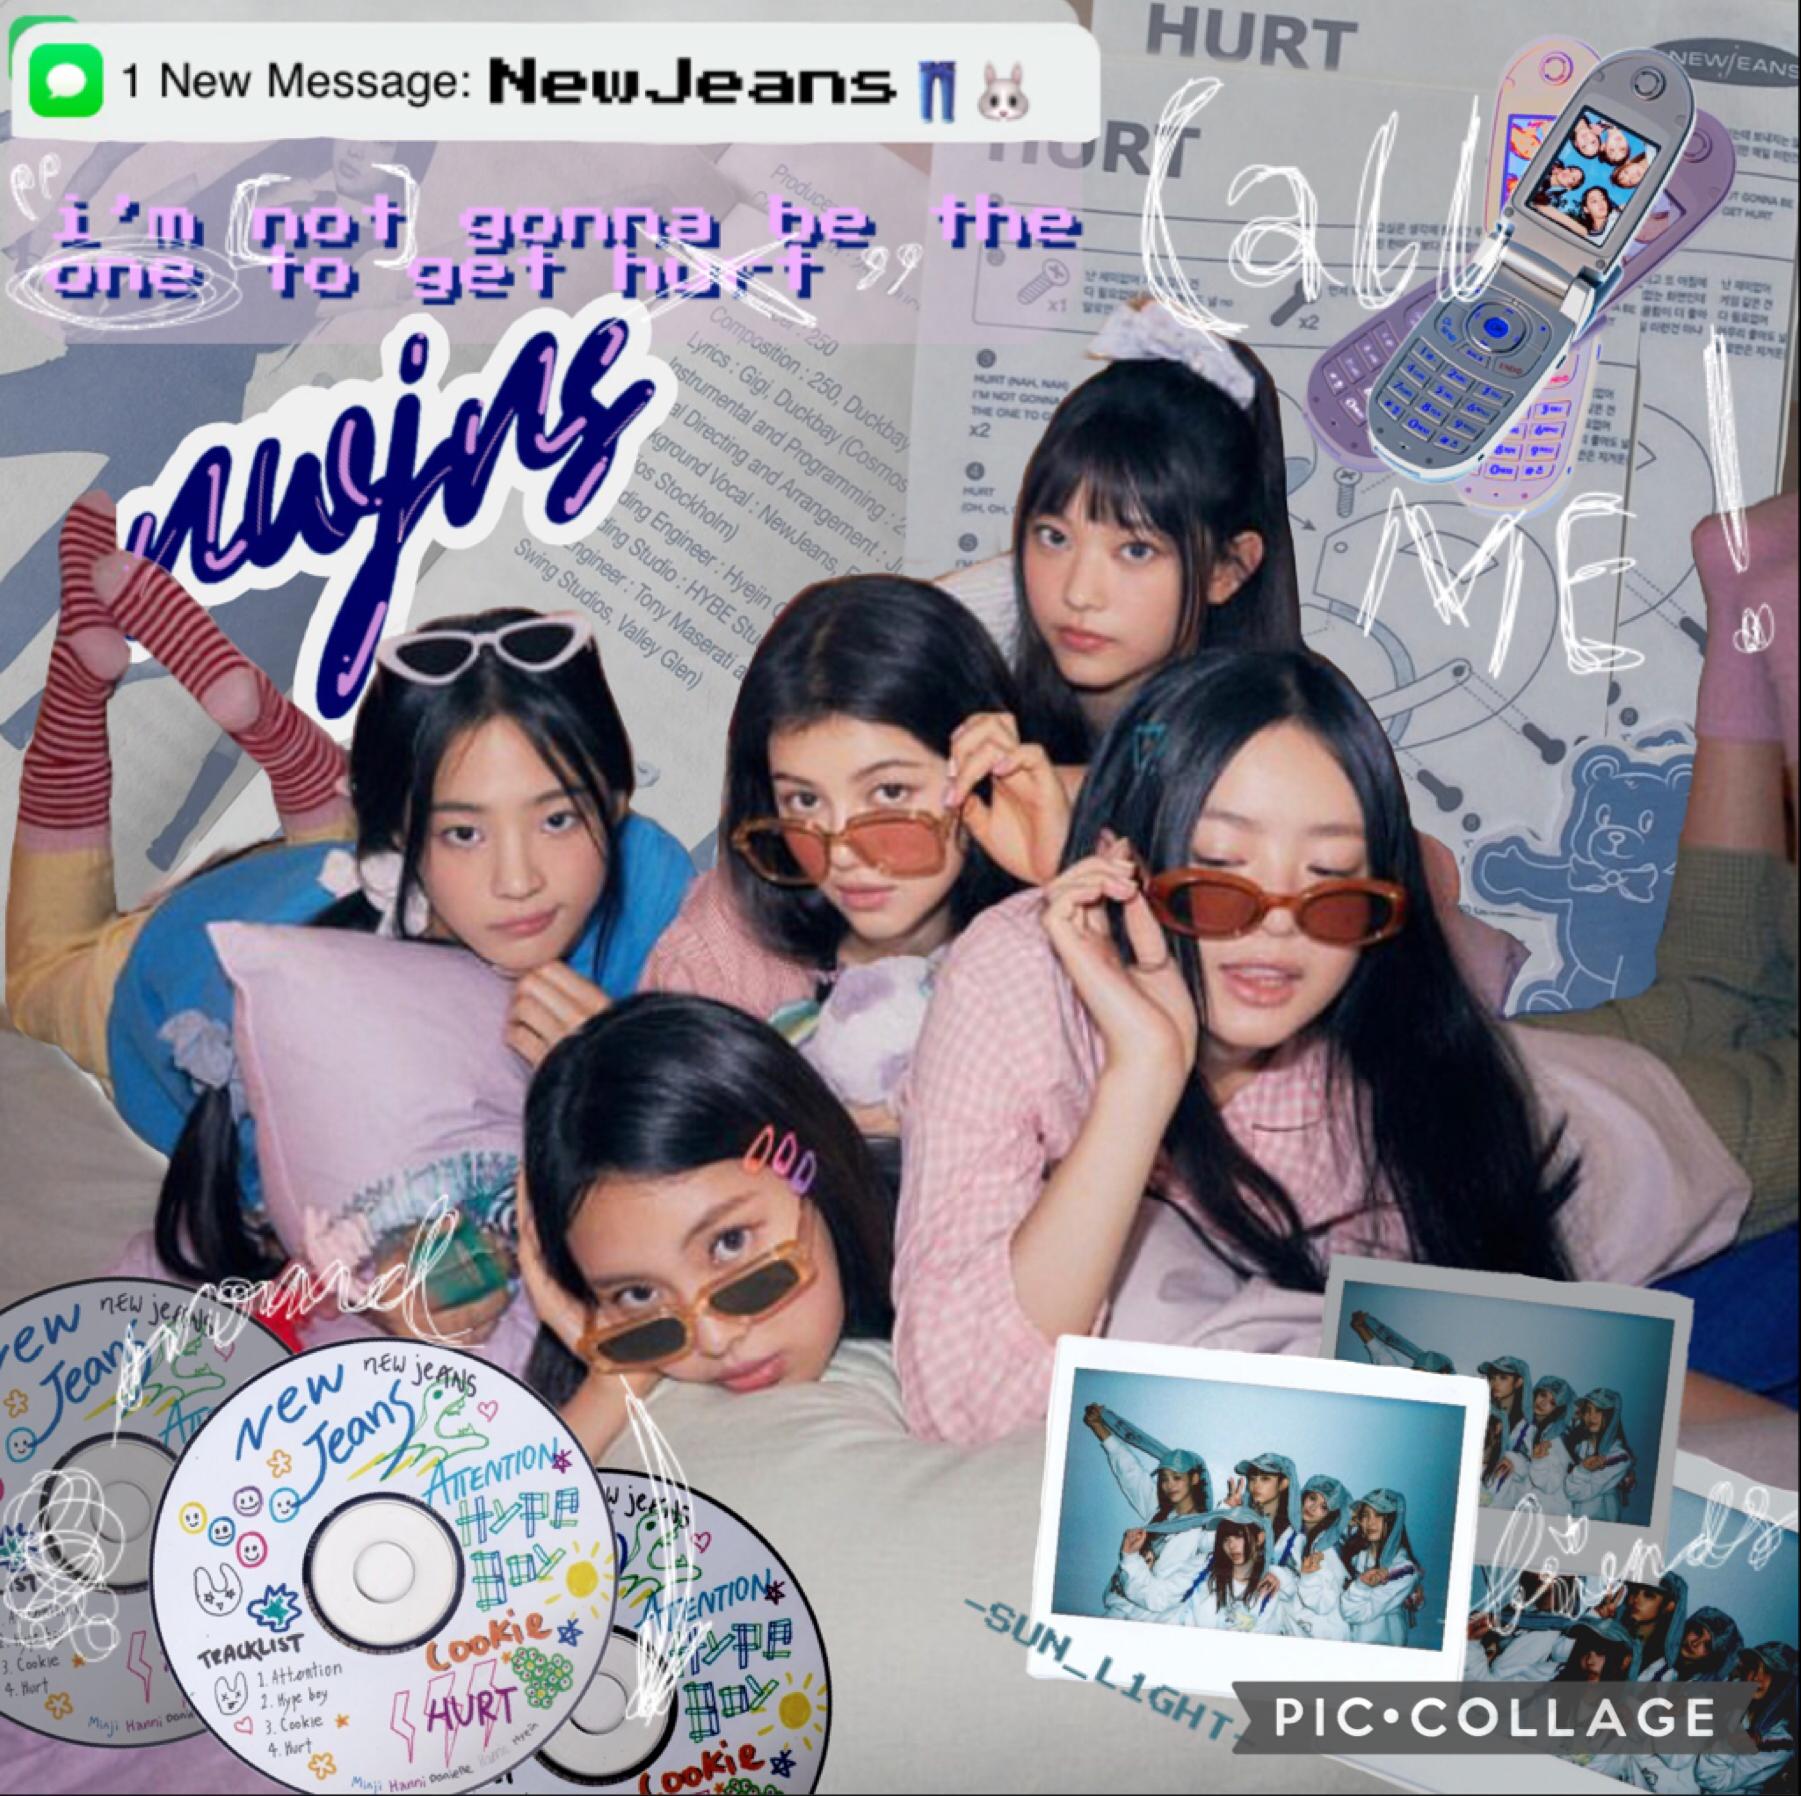 🕶️📞🐇 ~ quote ‘hurt’ - newjeans >> 19/4/23
experimented a lot w layering here ! 💿 collaging w nwjns has rlly revamped my recent inspo + it’s only been a week since my last post 🌟
💬 qotd: doodle w fingers?
💬 aotd: always T^T